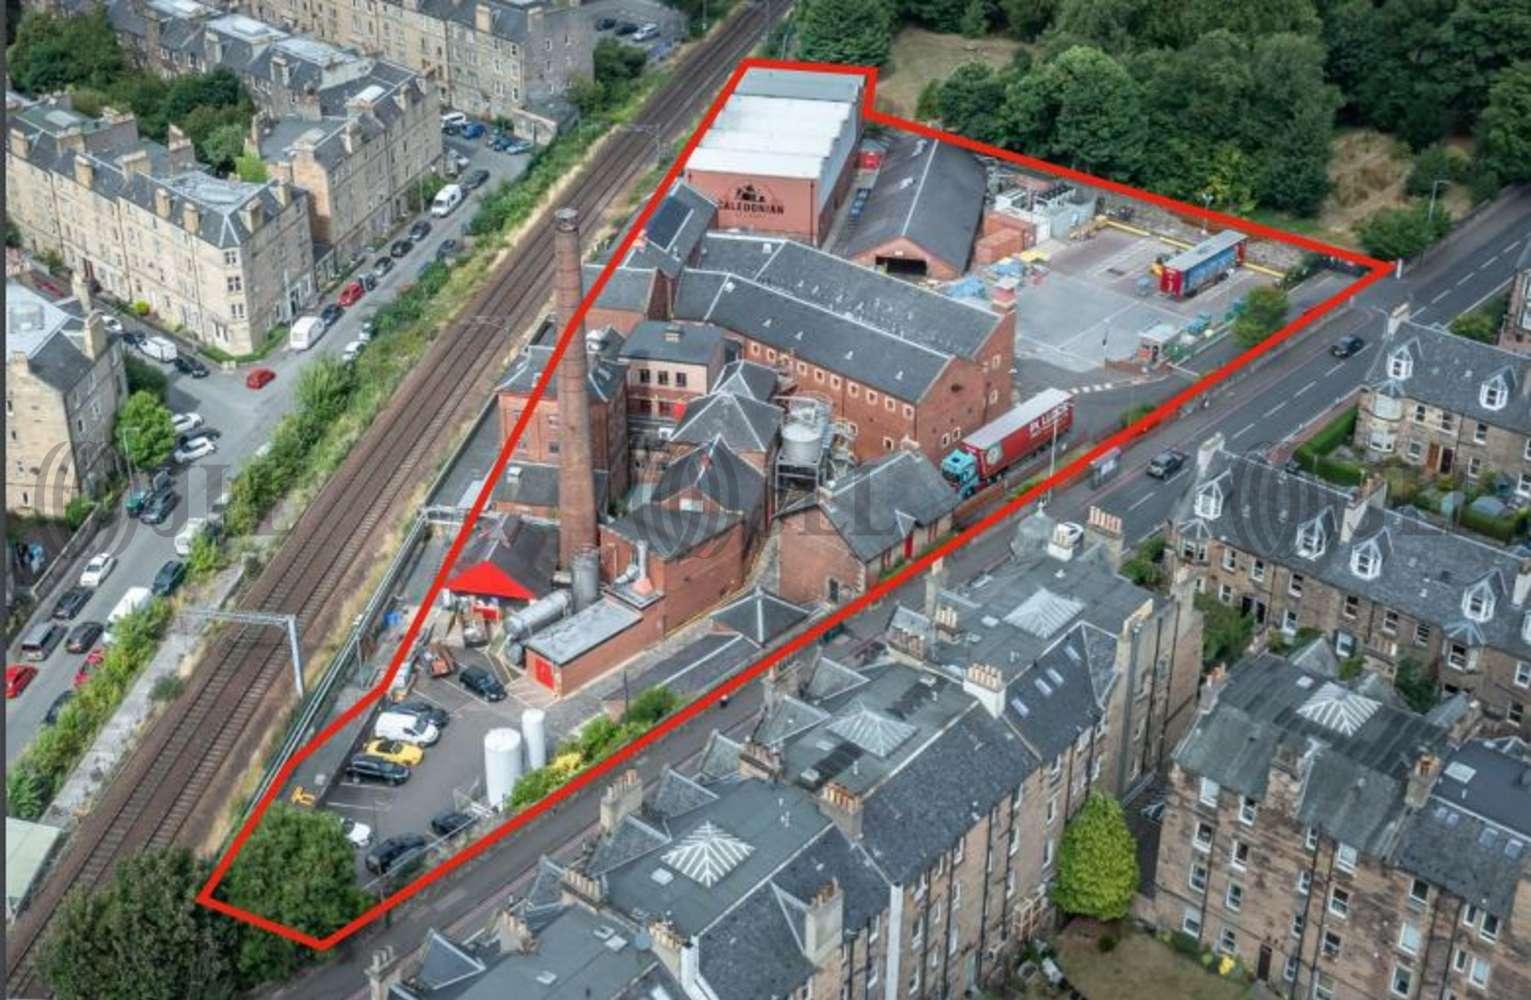 An aerial photograph of the Caledonian Brewery in Edinburgh